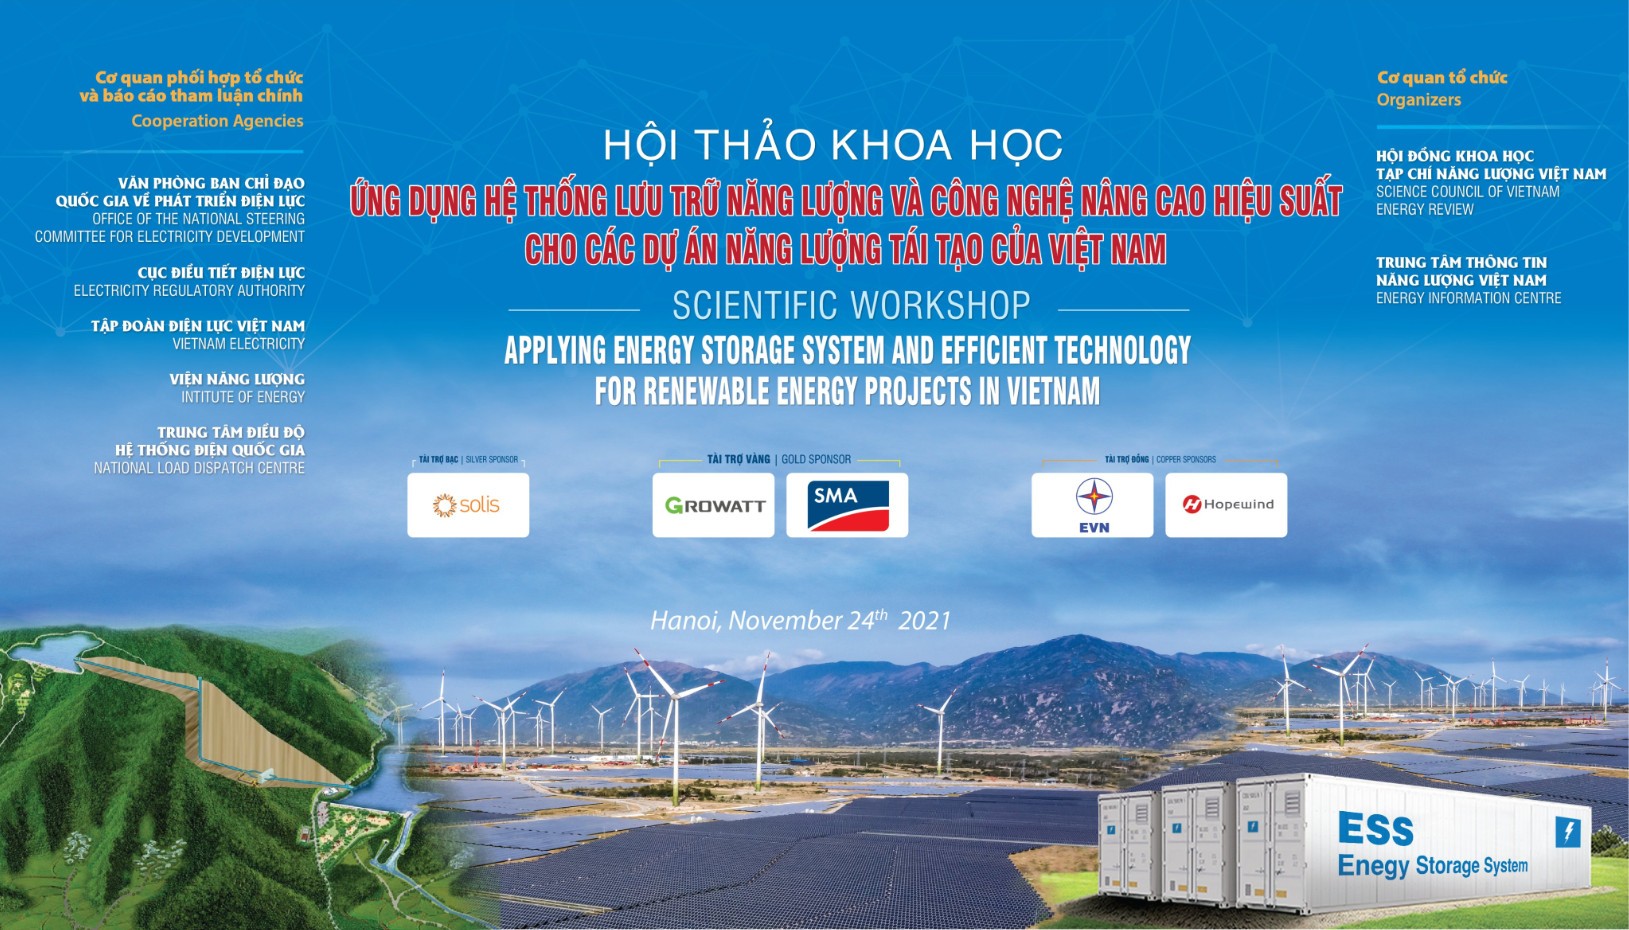 Energy storage is an effective solution for efficiency improvement of REPs in Vietnam